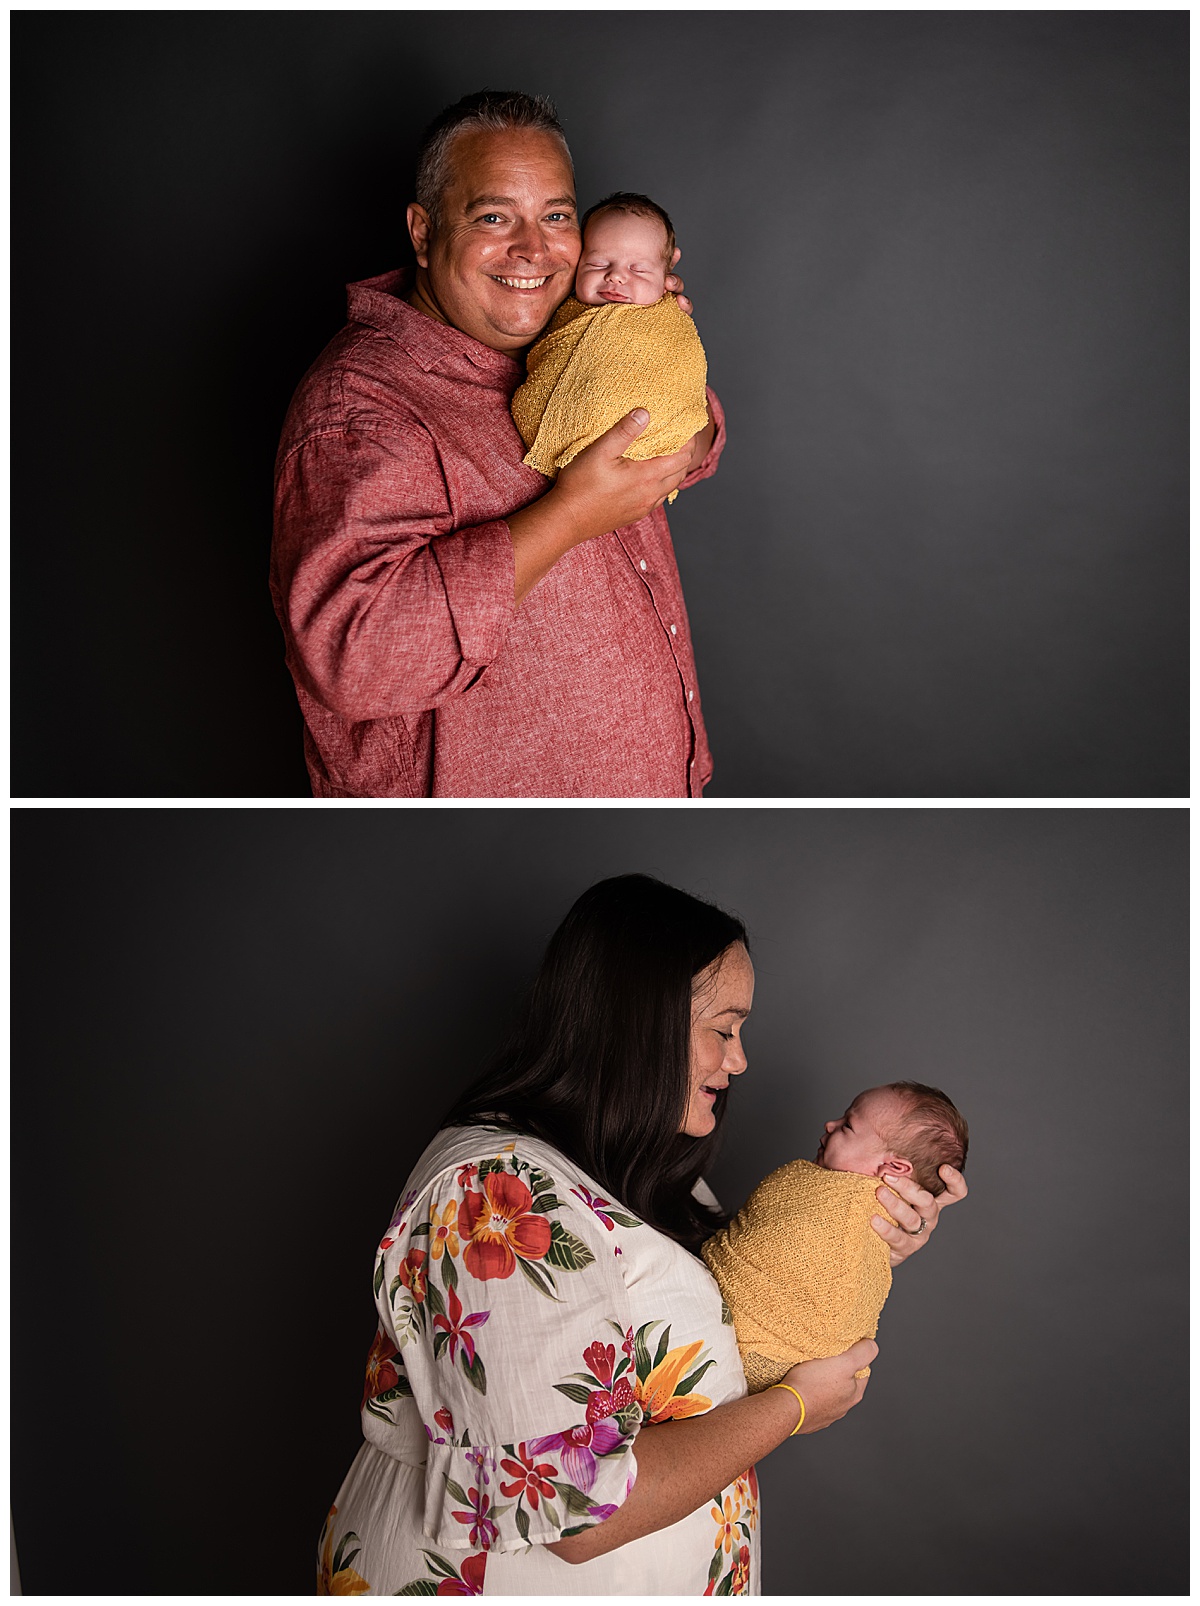 Newborn Session with Family Portraits before session. Beautiful baby boy in a yellow wrap, with mom & dad , Photographs by Bokeh Love Photography.